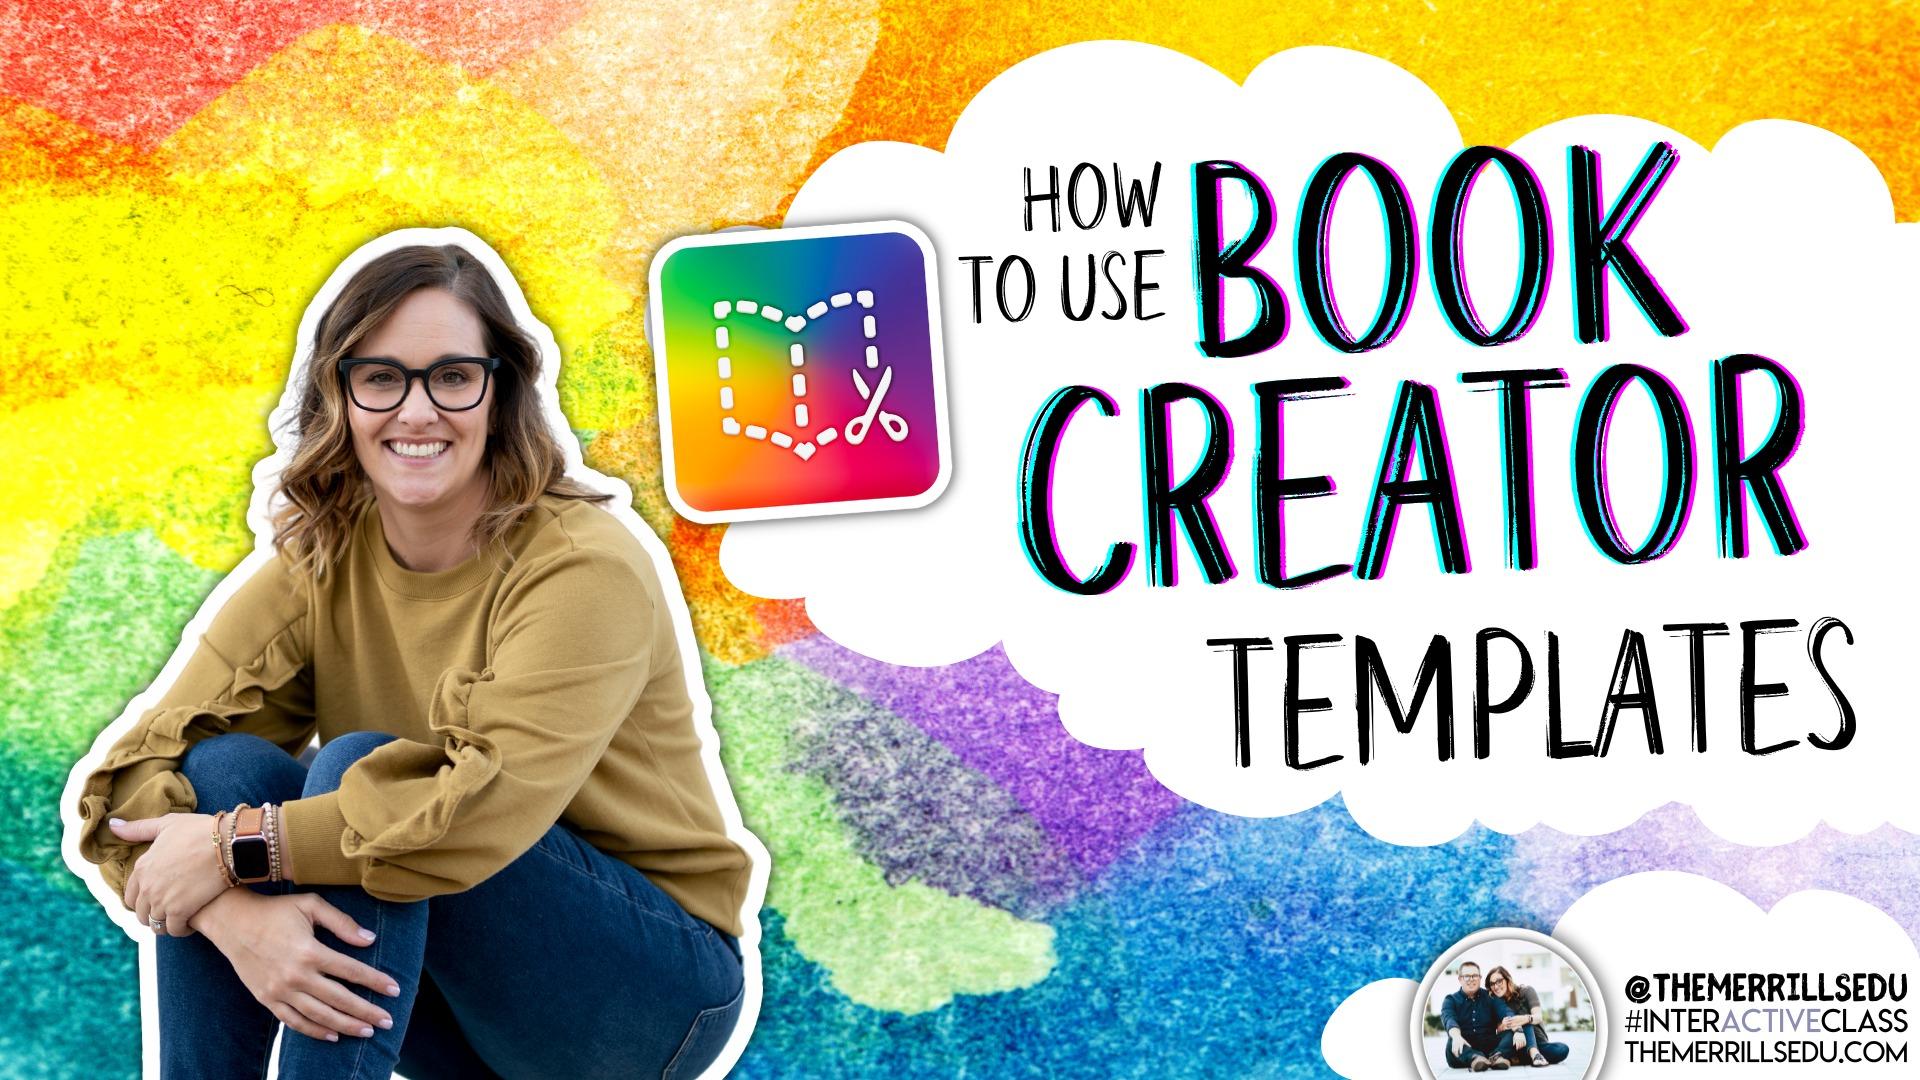 How to Use Book Creator Templates